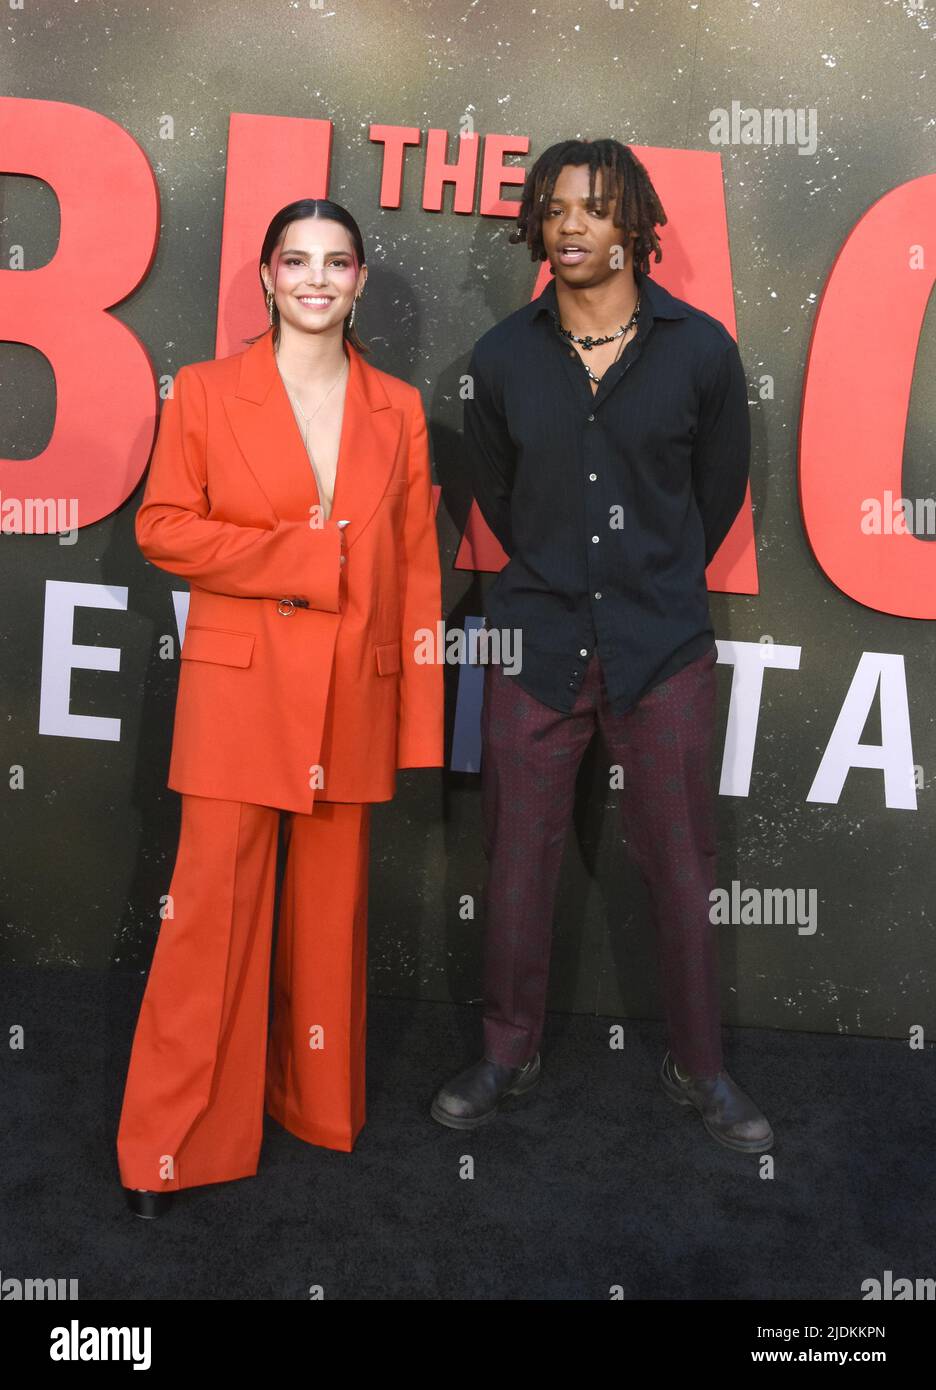 Hollywood, California, USA 21st June 2022 Actress Indie Navarrette and actor Henry Hunter Hall attend Universal Pictures 'The Black Phone' Premiere at TCL Chinese Theatre on June 21, 2022 in Hollywood, California, USA. Photo by Barry King/Alamy Live News Stock Photo